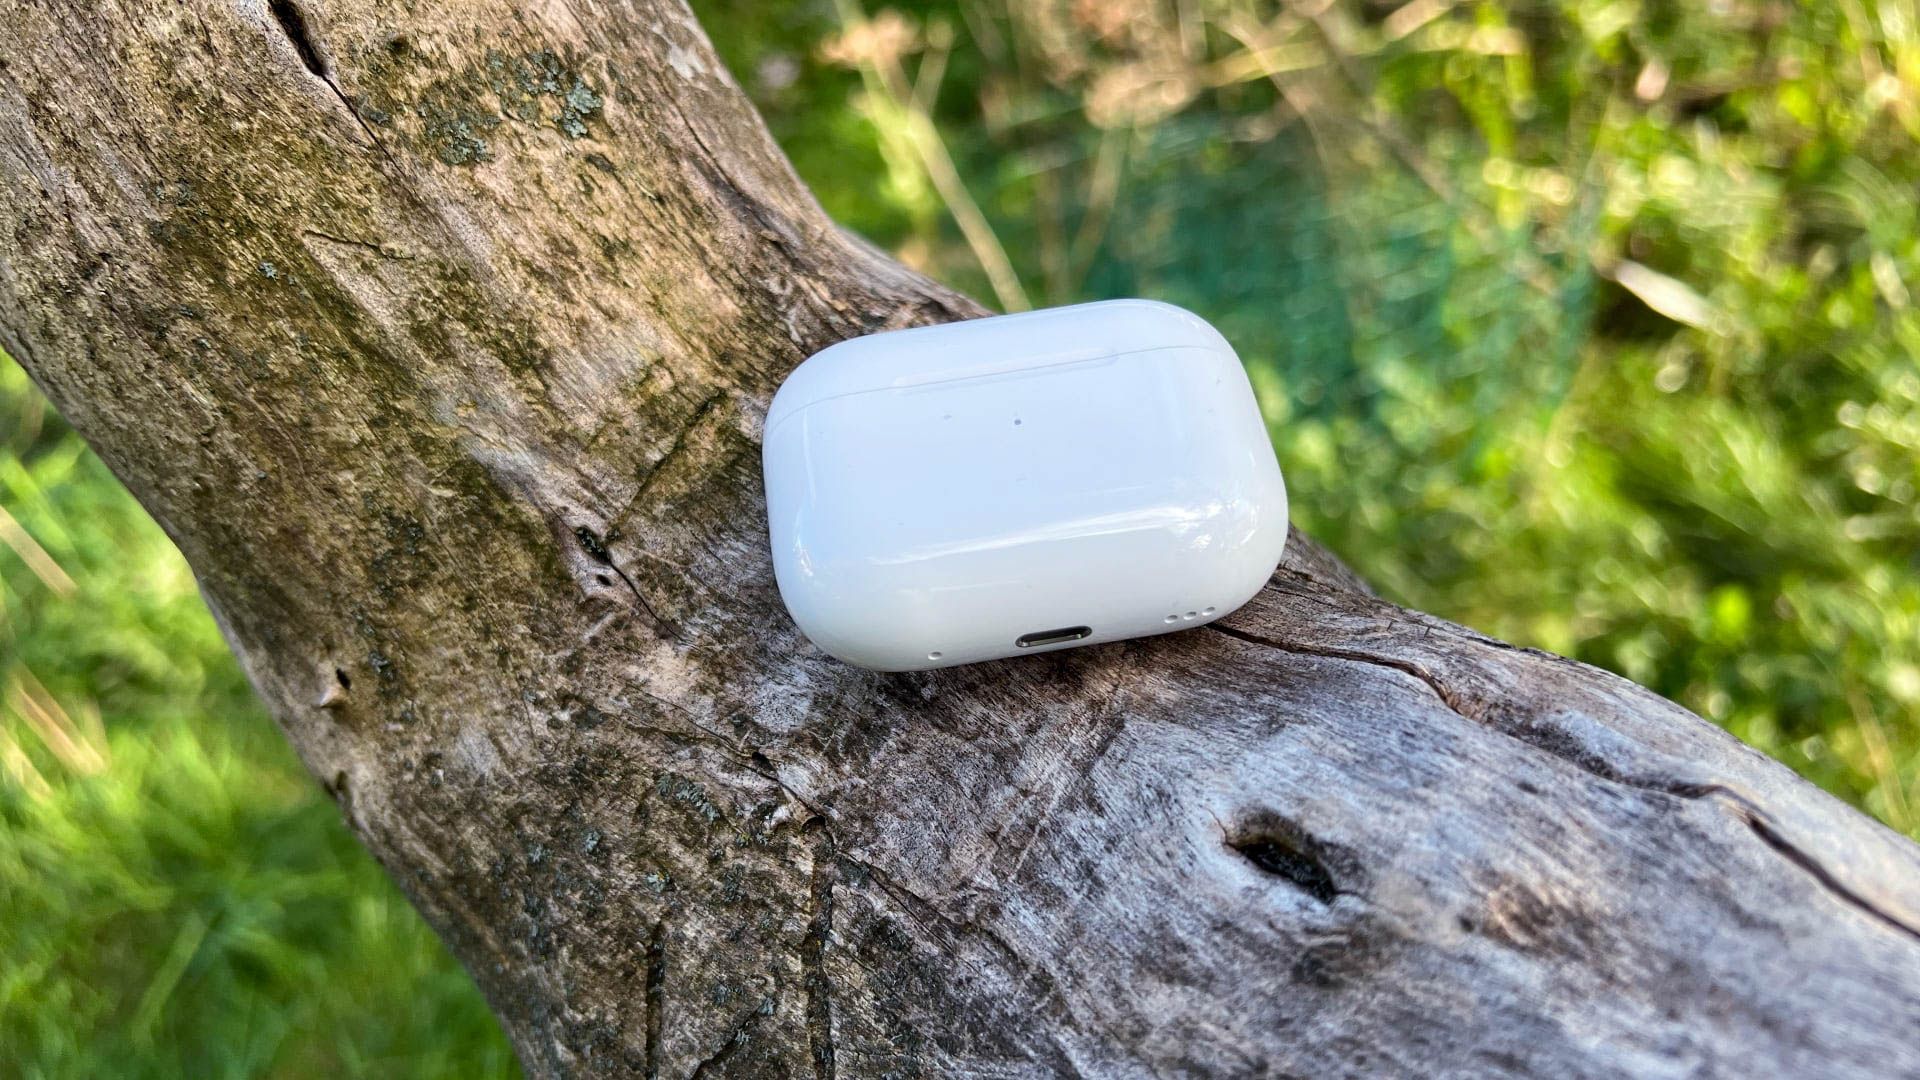 Apple AirPods Pro 2 case in tree